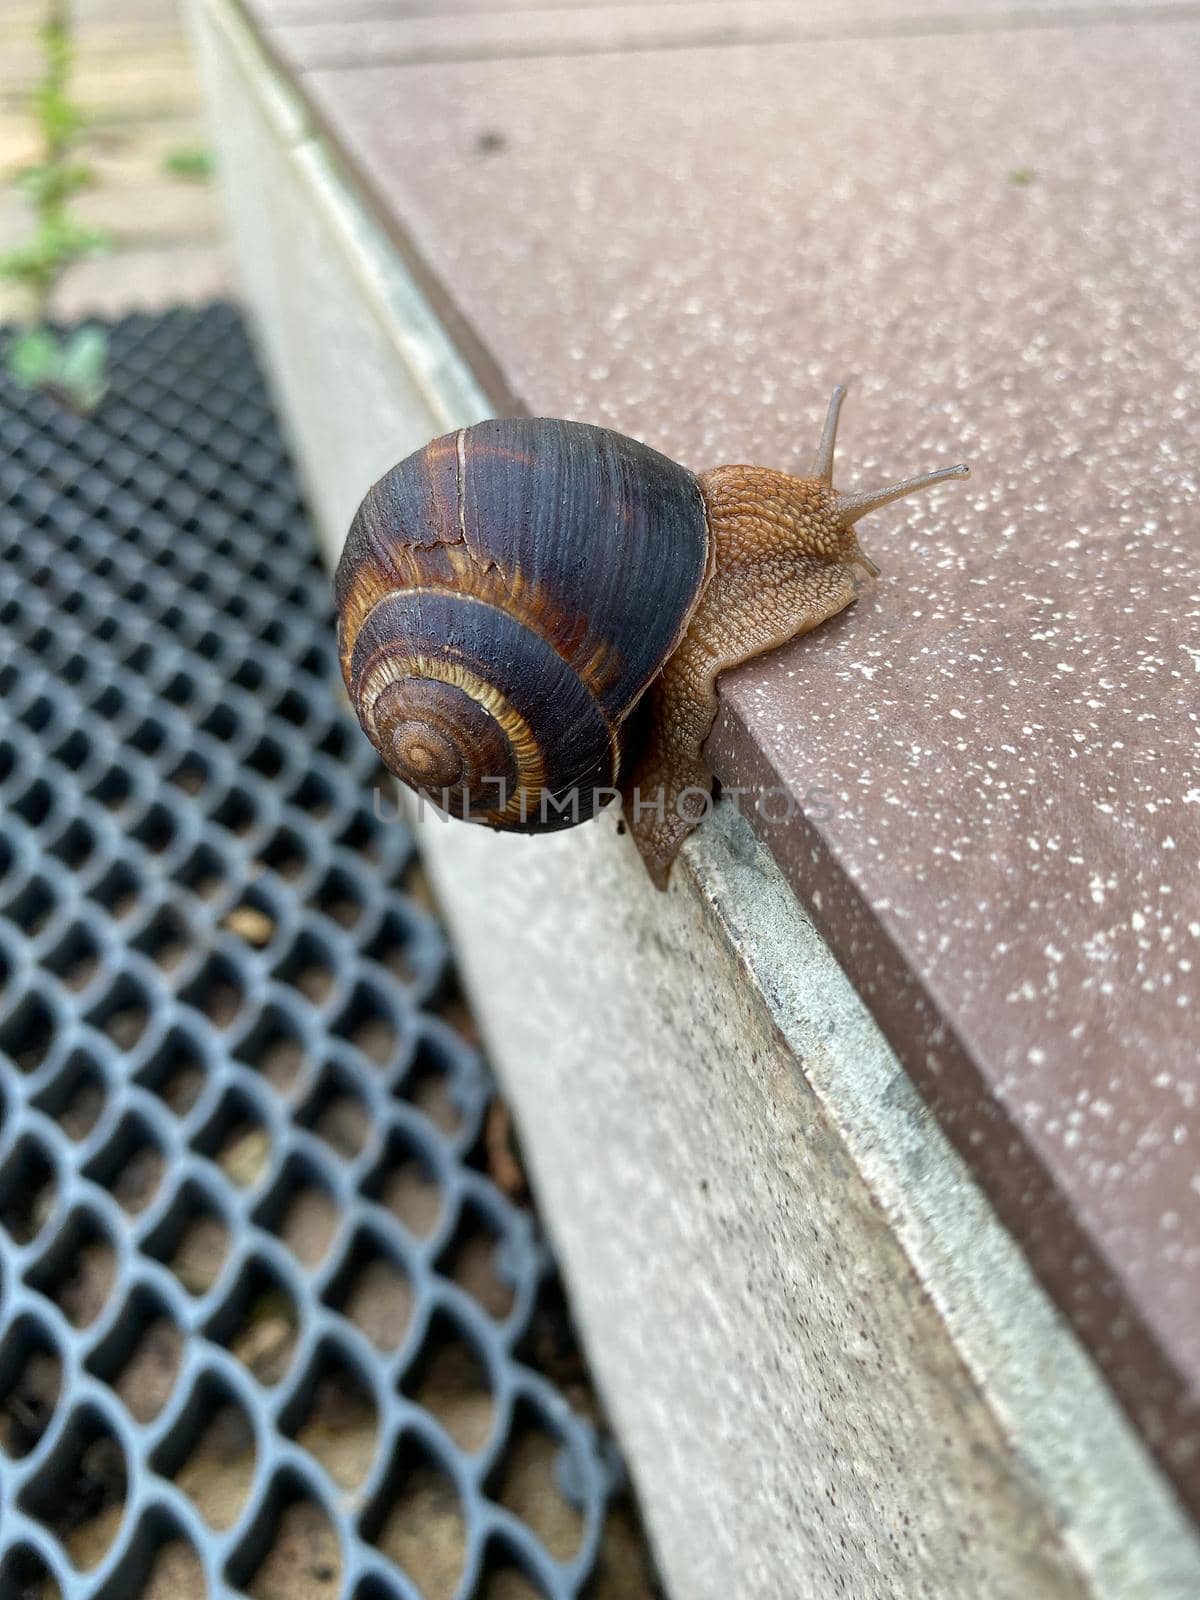 grape snail climbs up the steep rung of a staircase by Proxima13